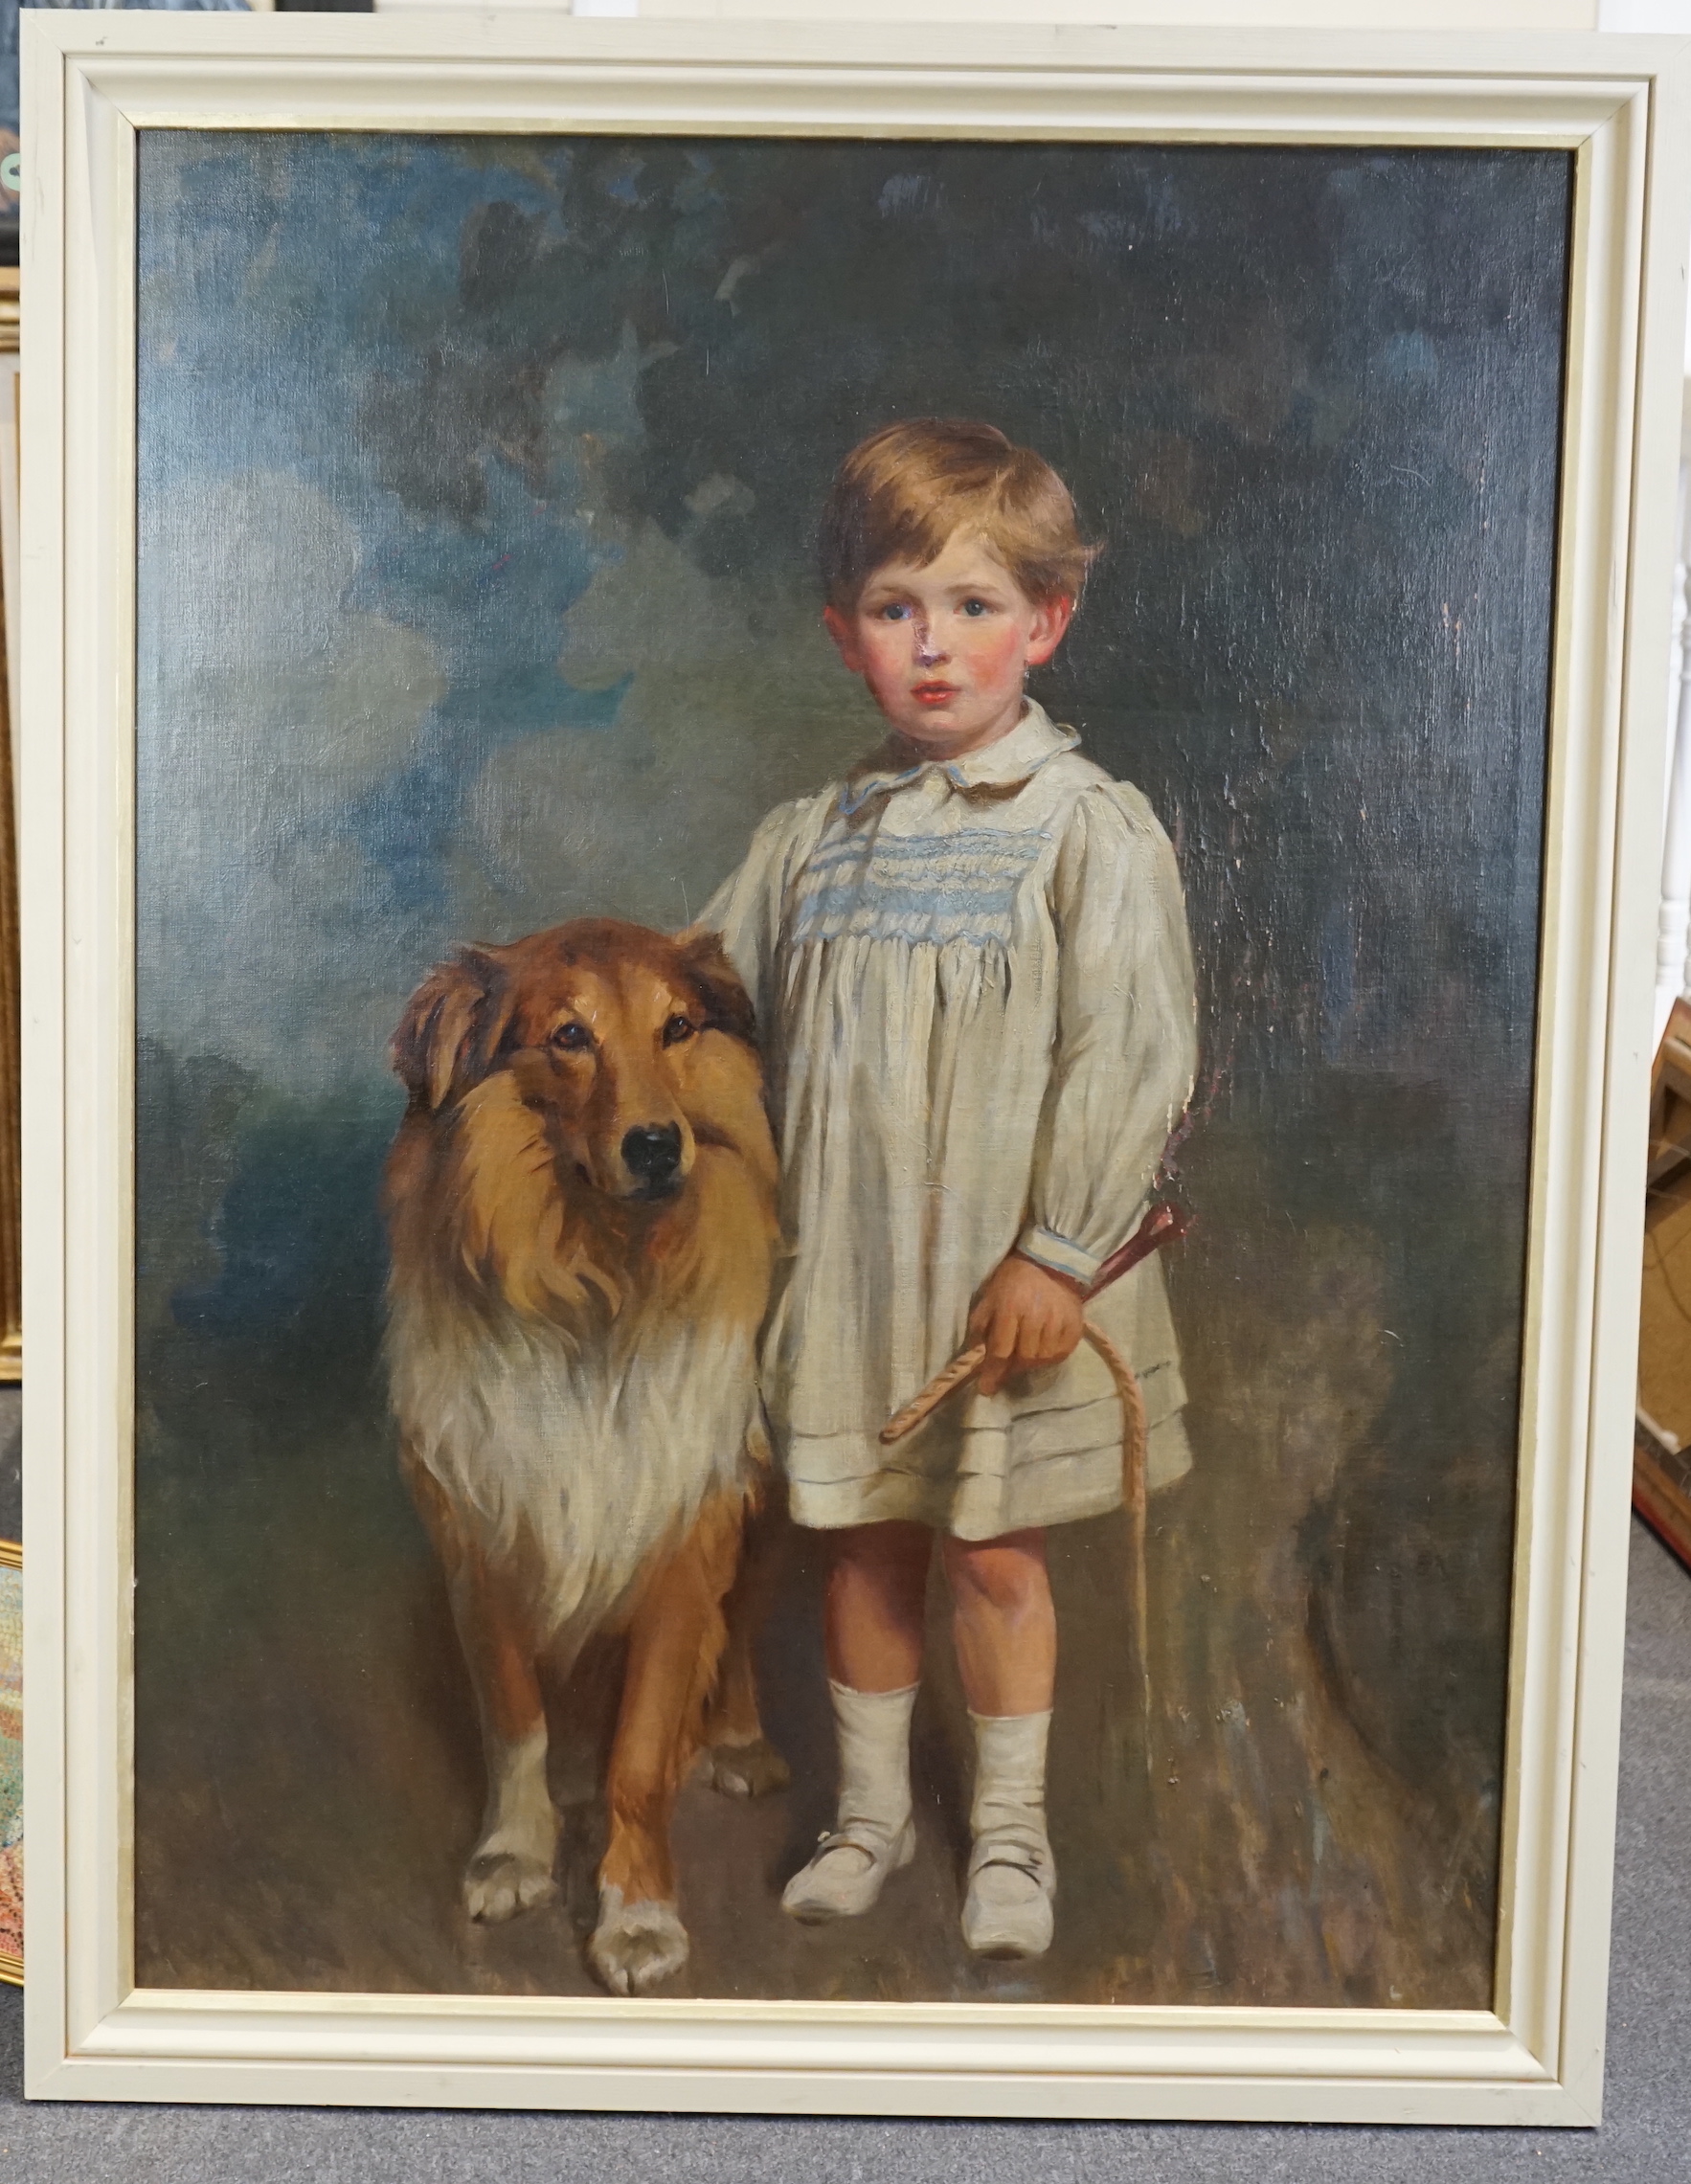 Attributed to J.W. Beaufort (fl. circa 1920-30), Full length portrait of a boy standing beside a collie, oil on canvas, 121 x 91cm